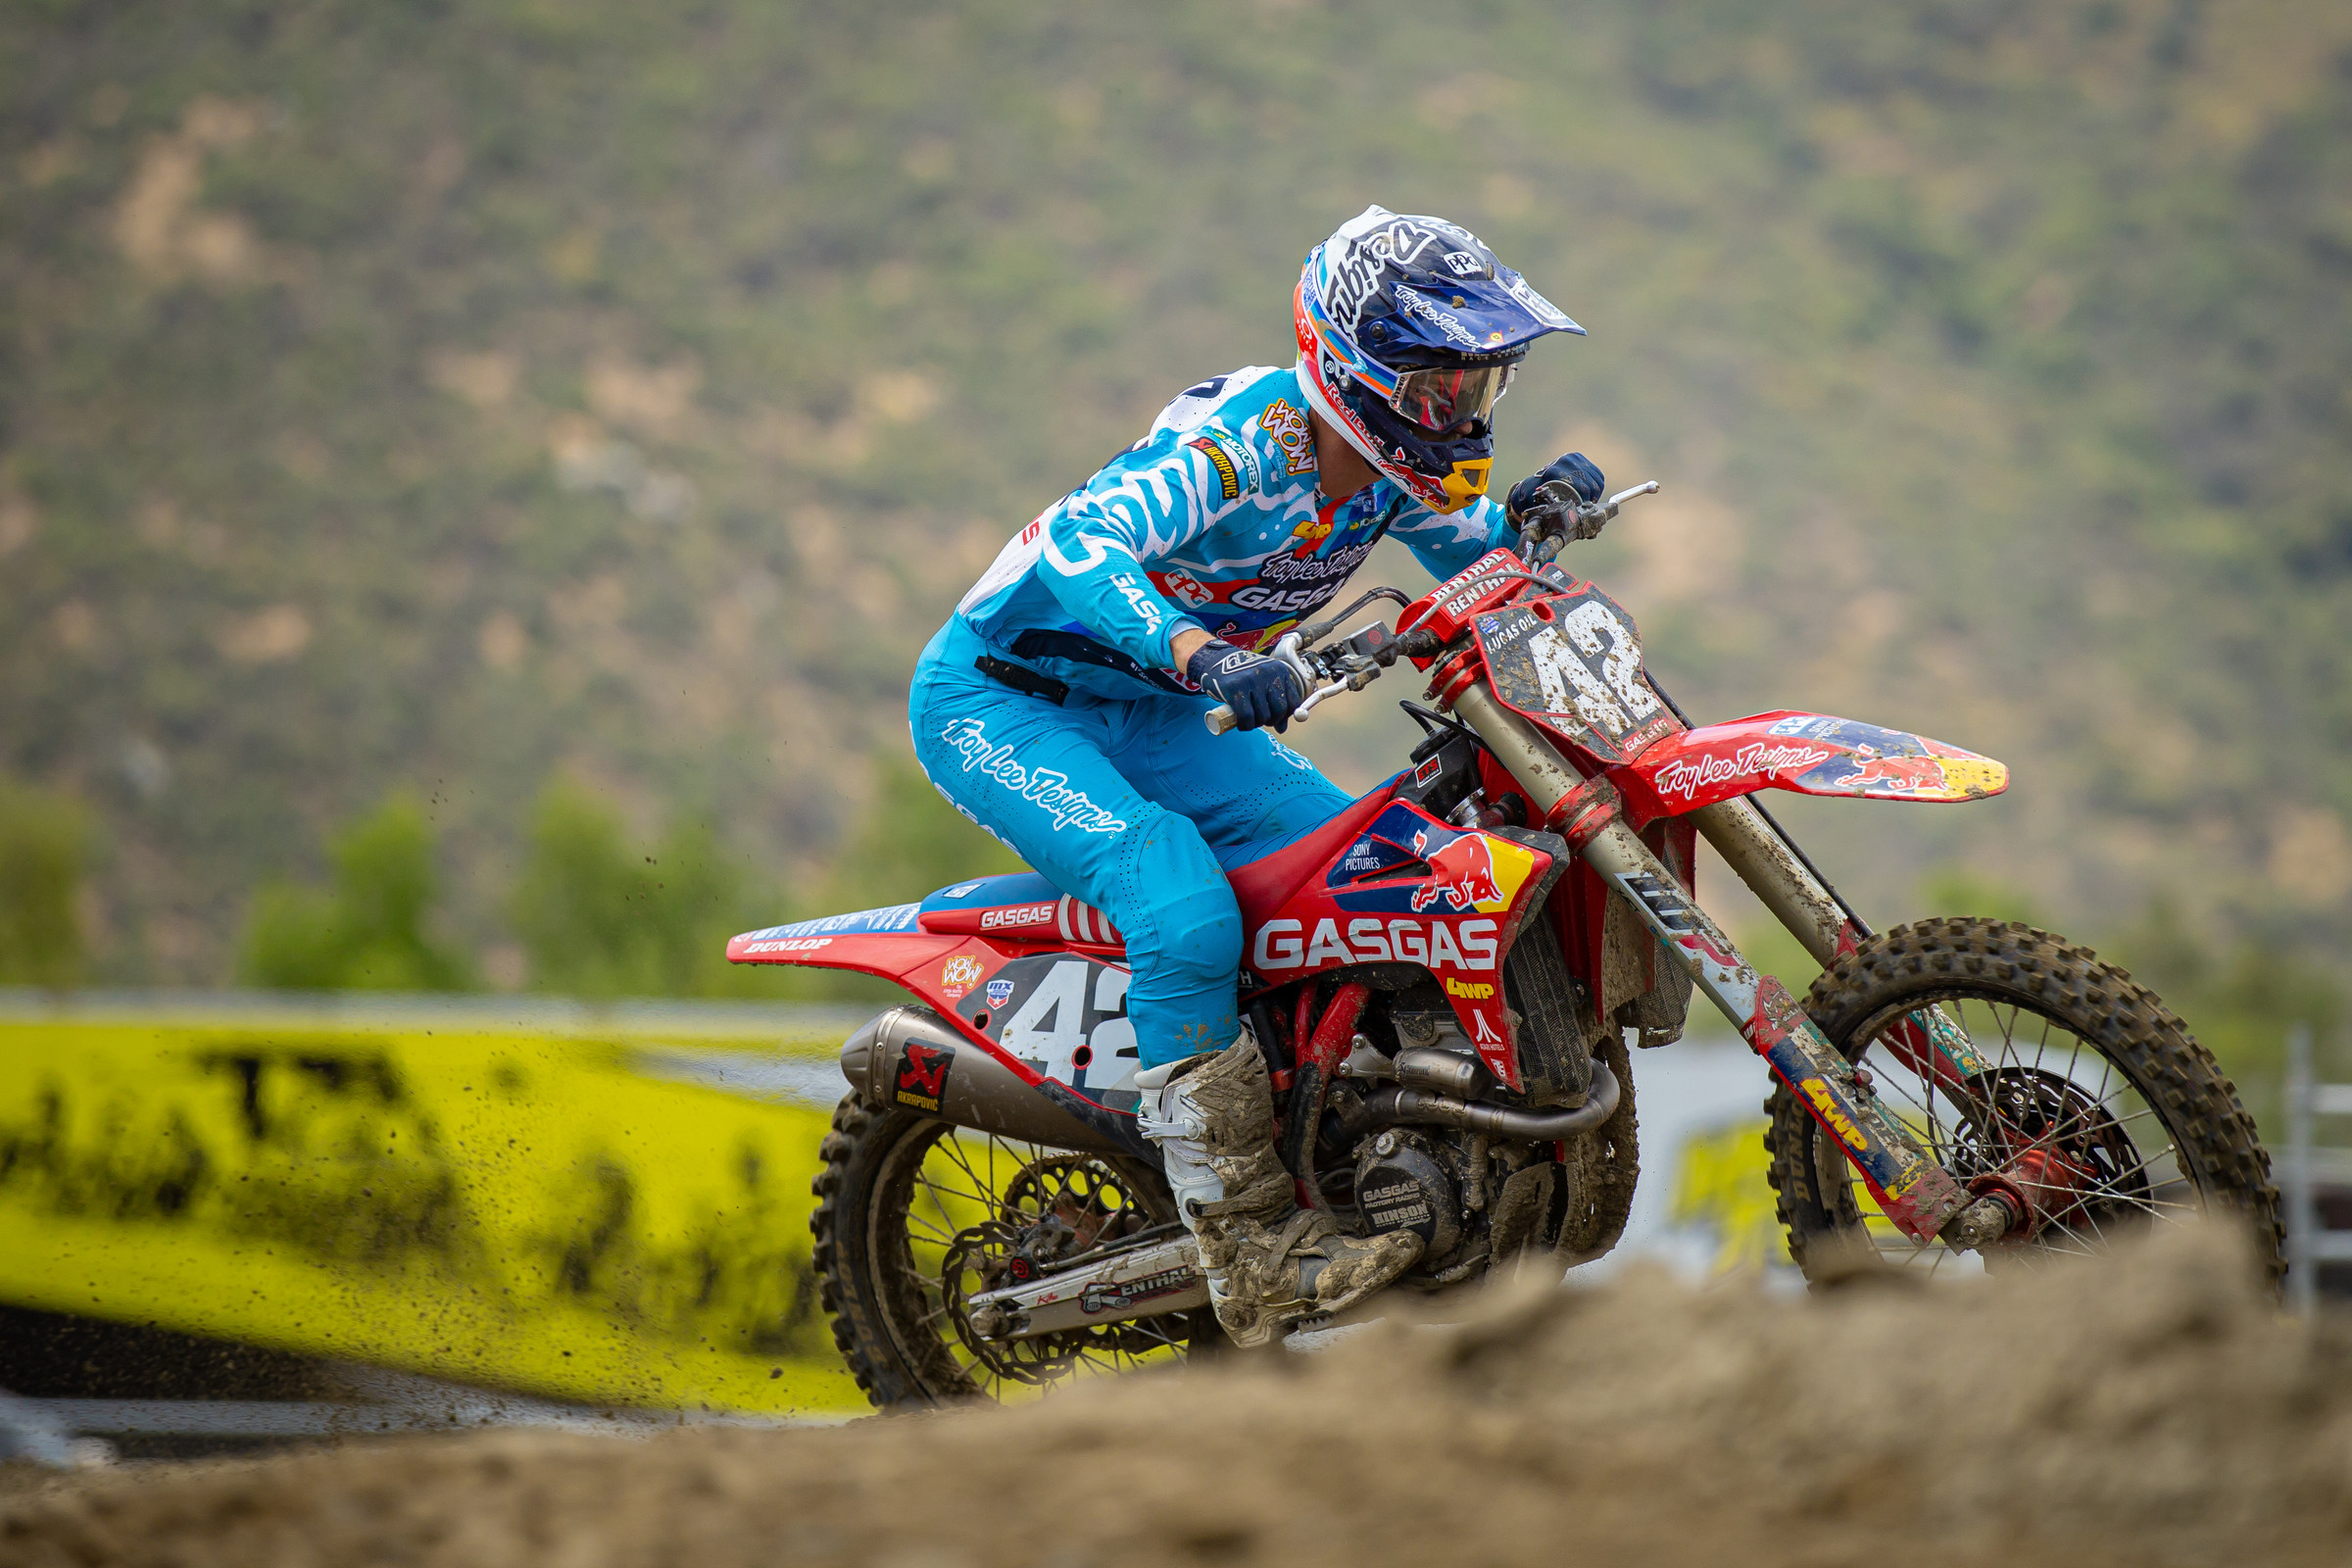 Videos to Watch Before 2021 Pro Motocross Starts